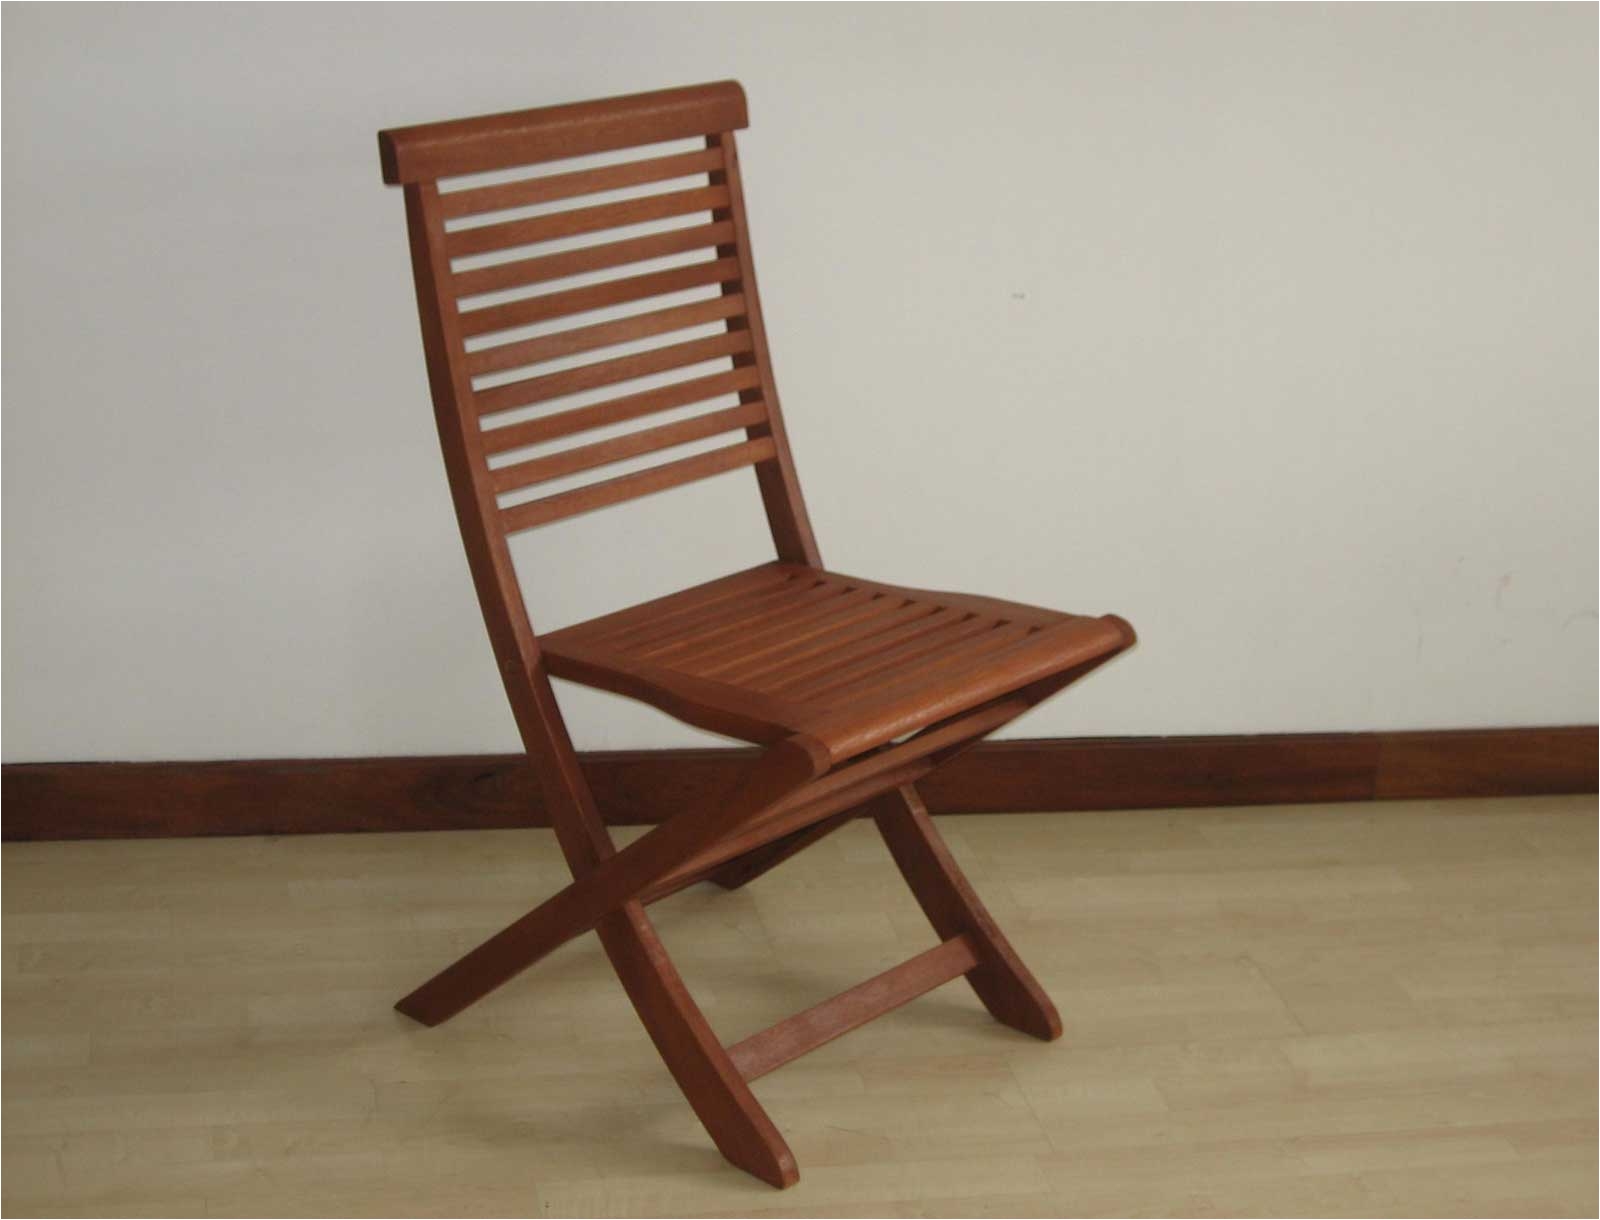 Lifetime Plastic Chairs Costco Chair Wooden Wood Frame Chair Costco Padded Small Fold Up Fabric